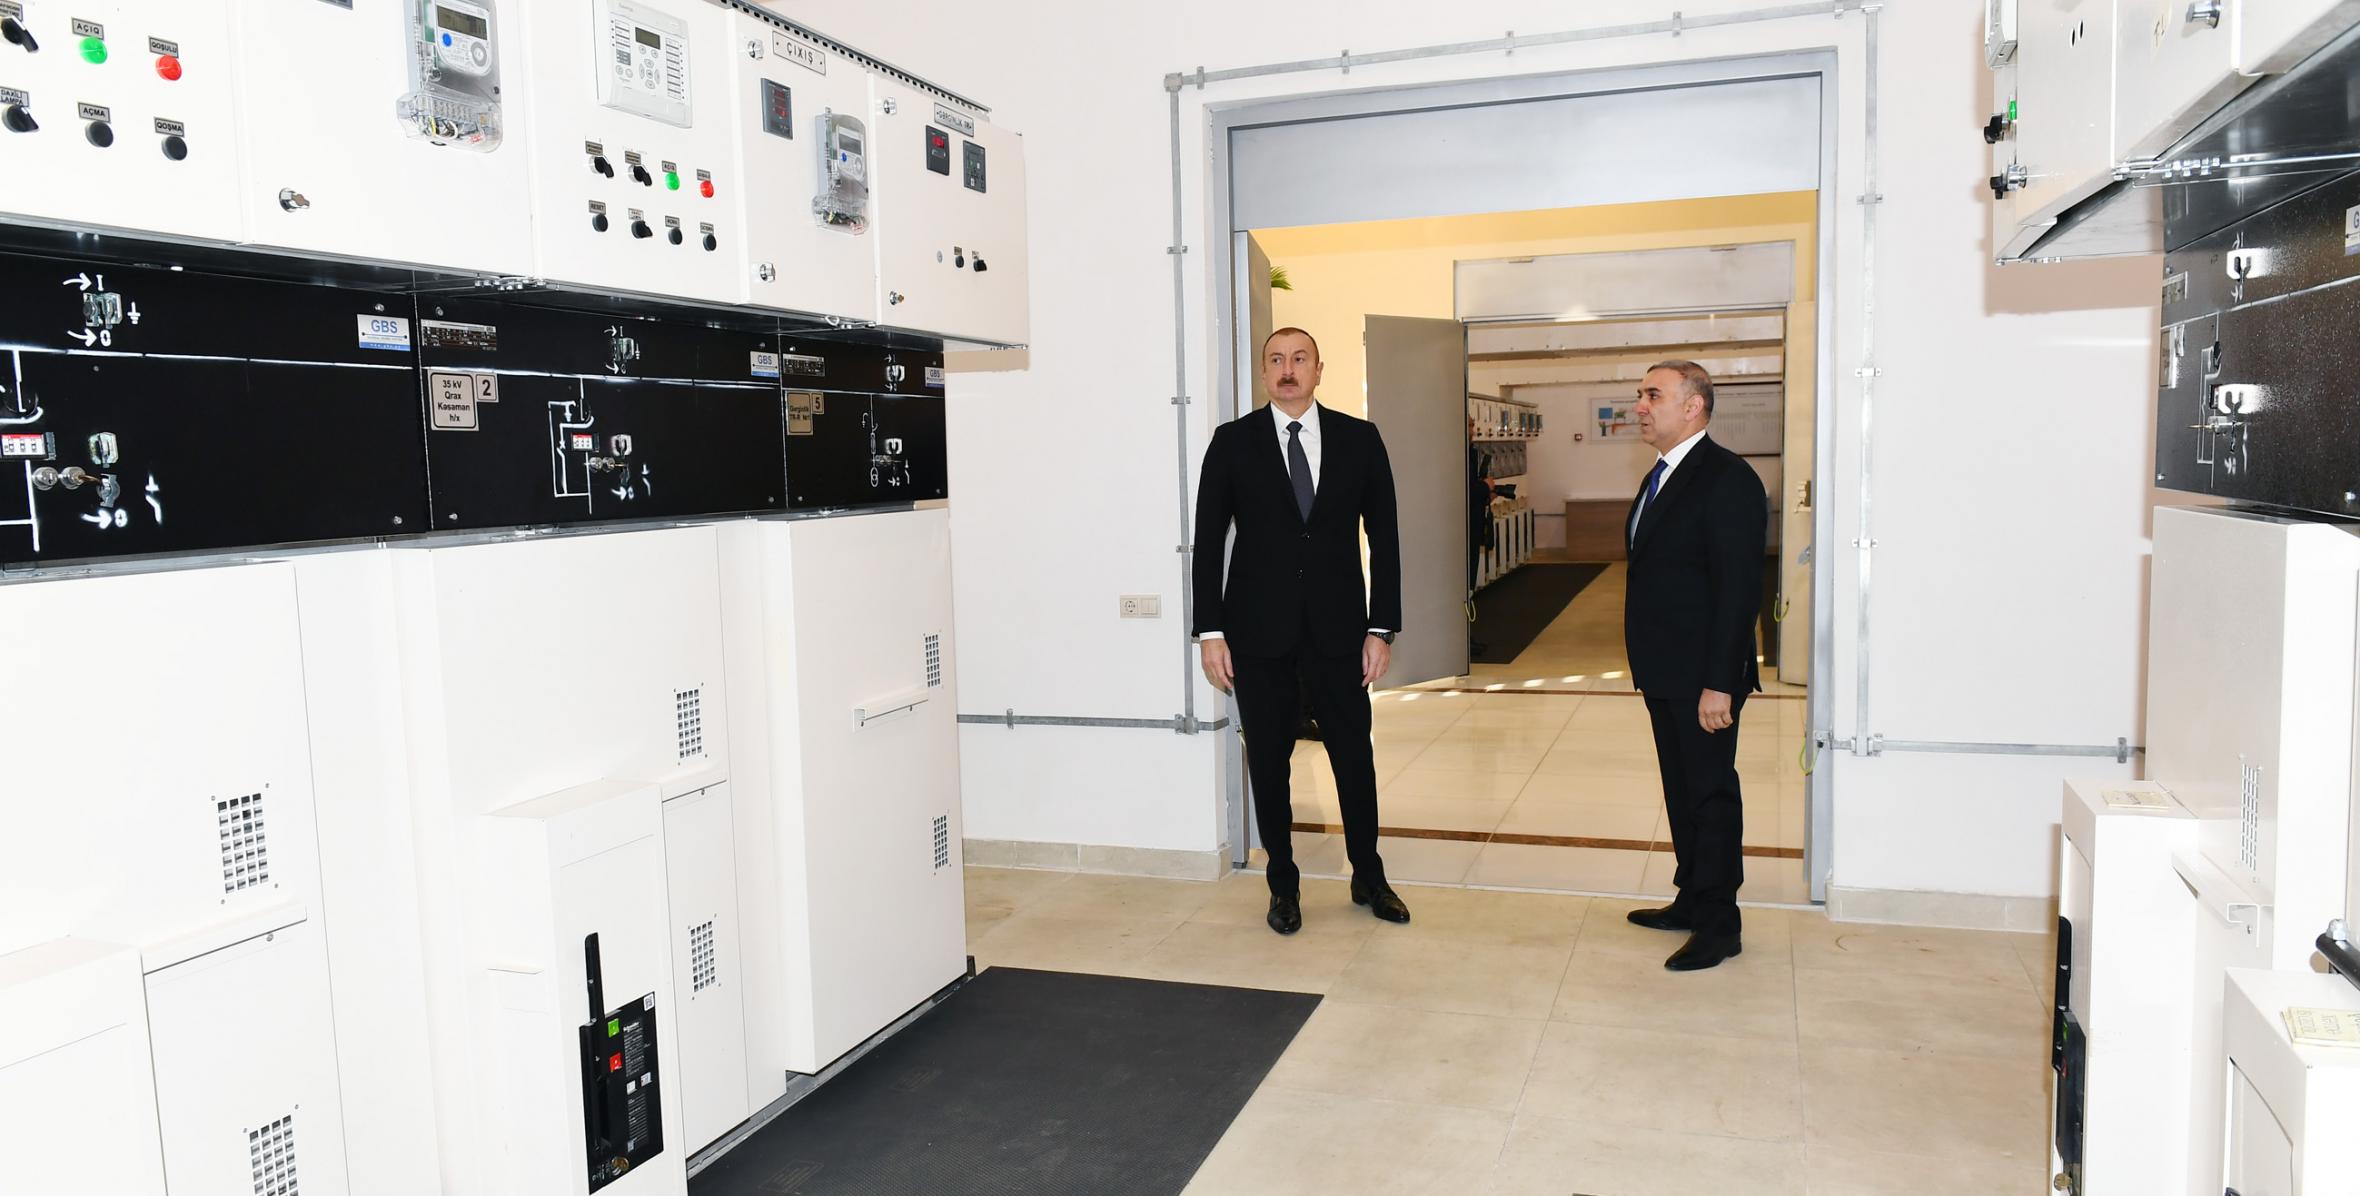 Ilham Aliyev attended opening of newly renovated Aghstafa electical substation